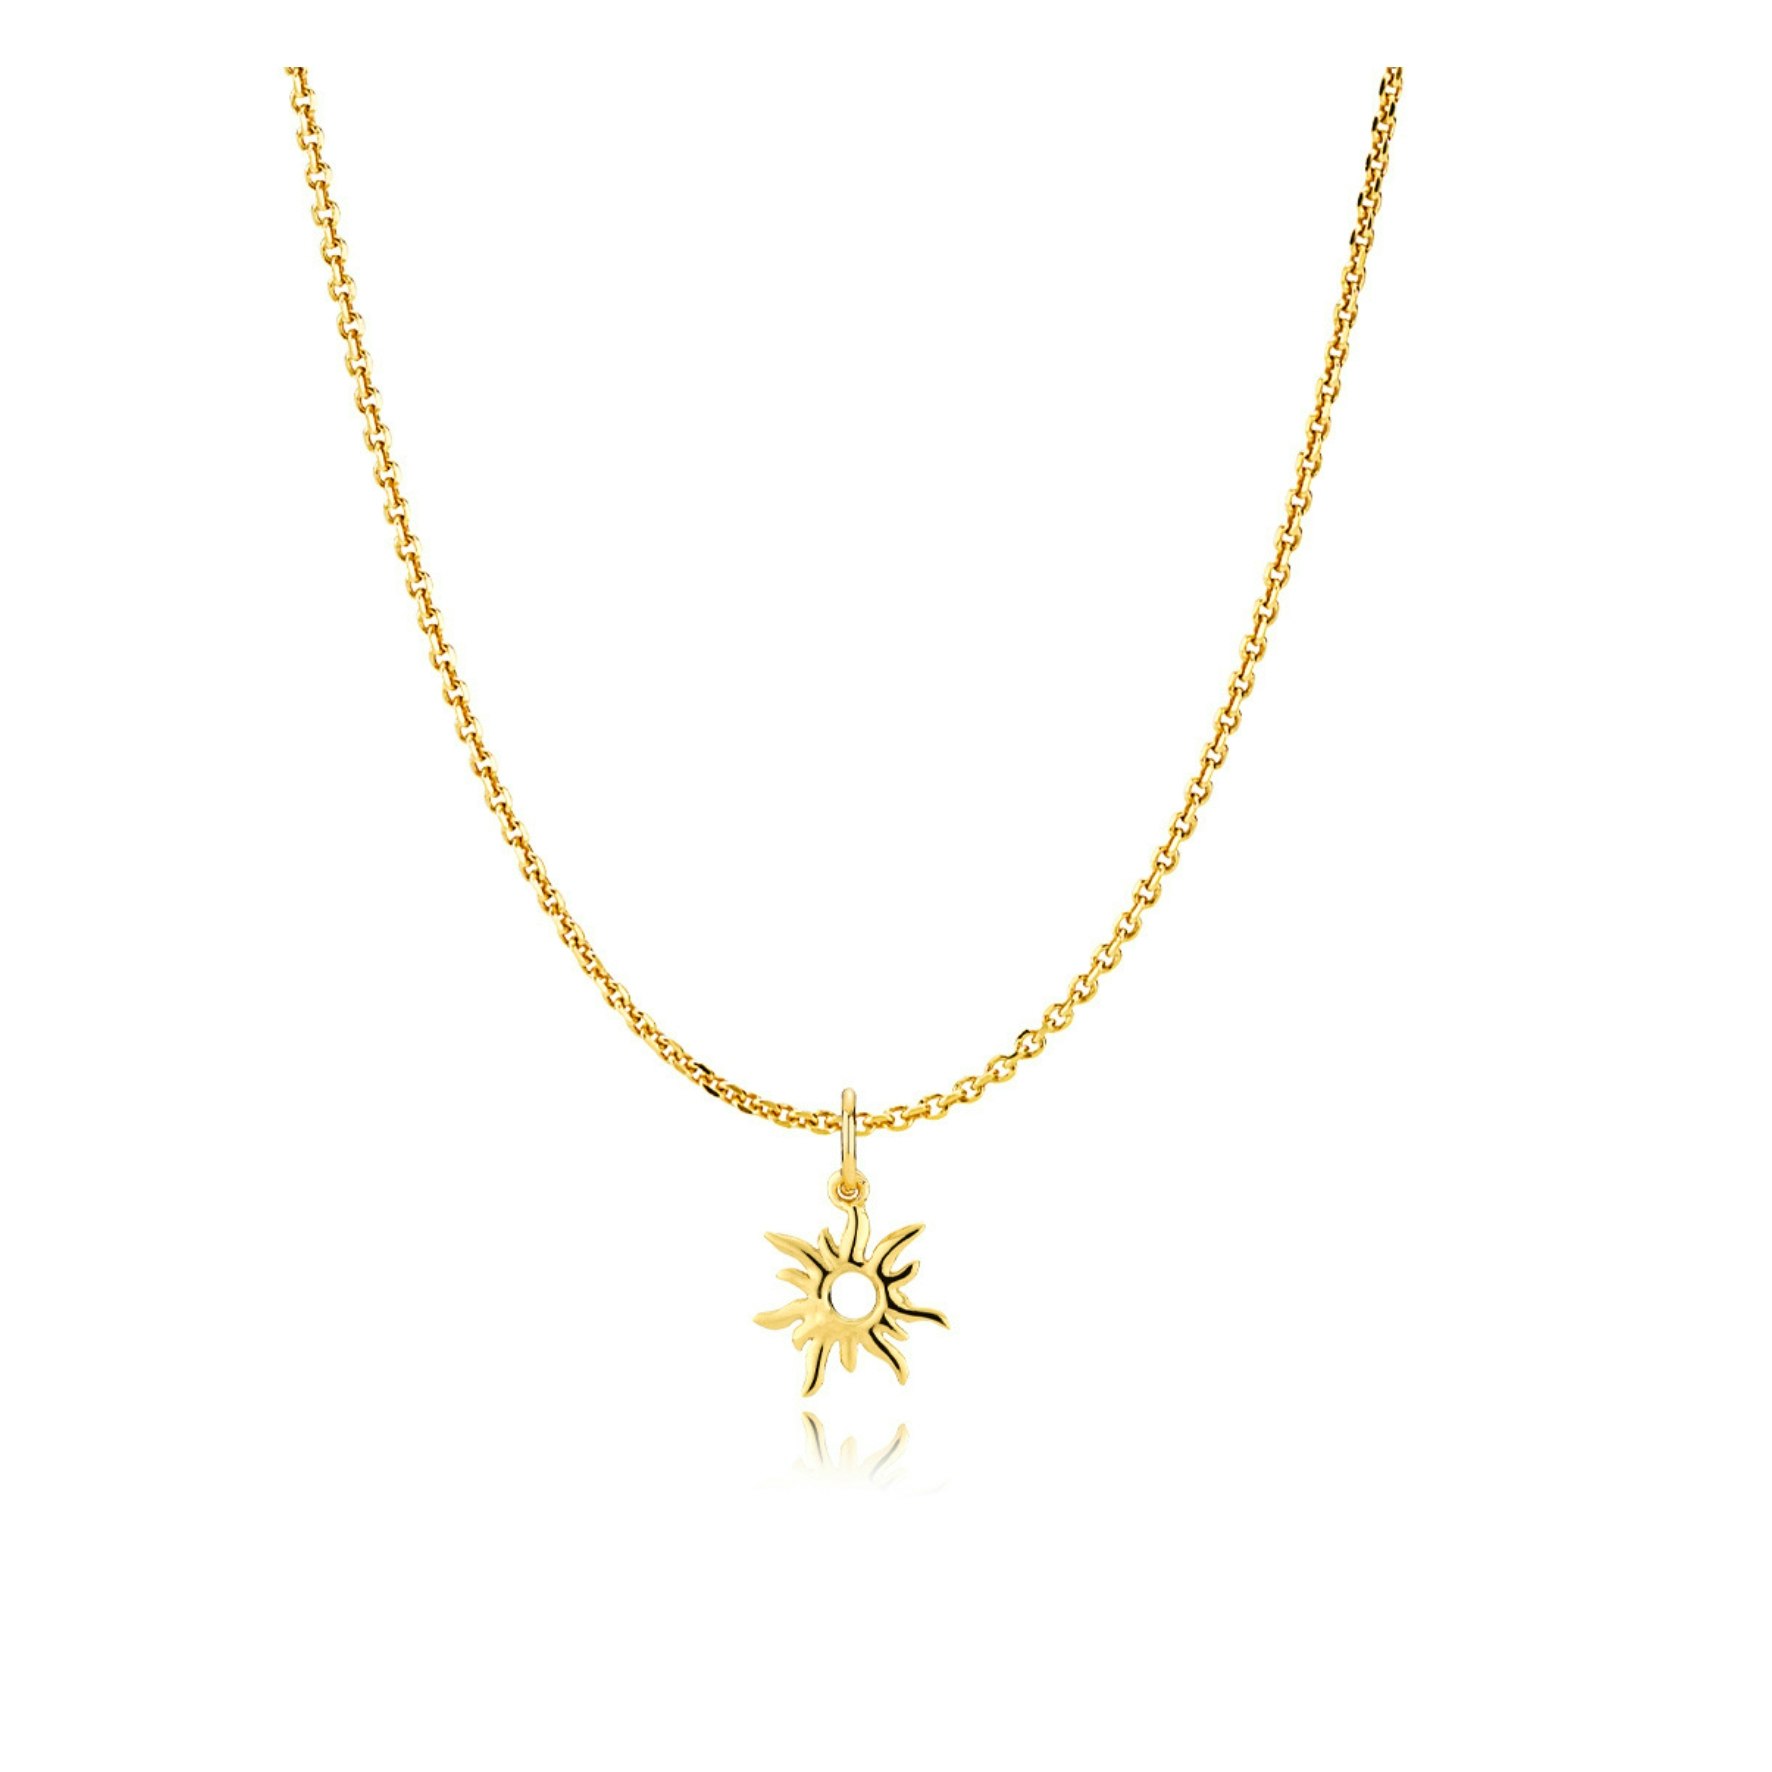 Universe Sun Necklace from Sistie in Goldplated Silver Sterling 925